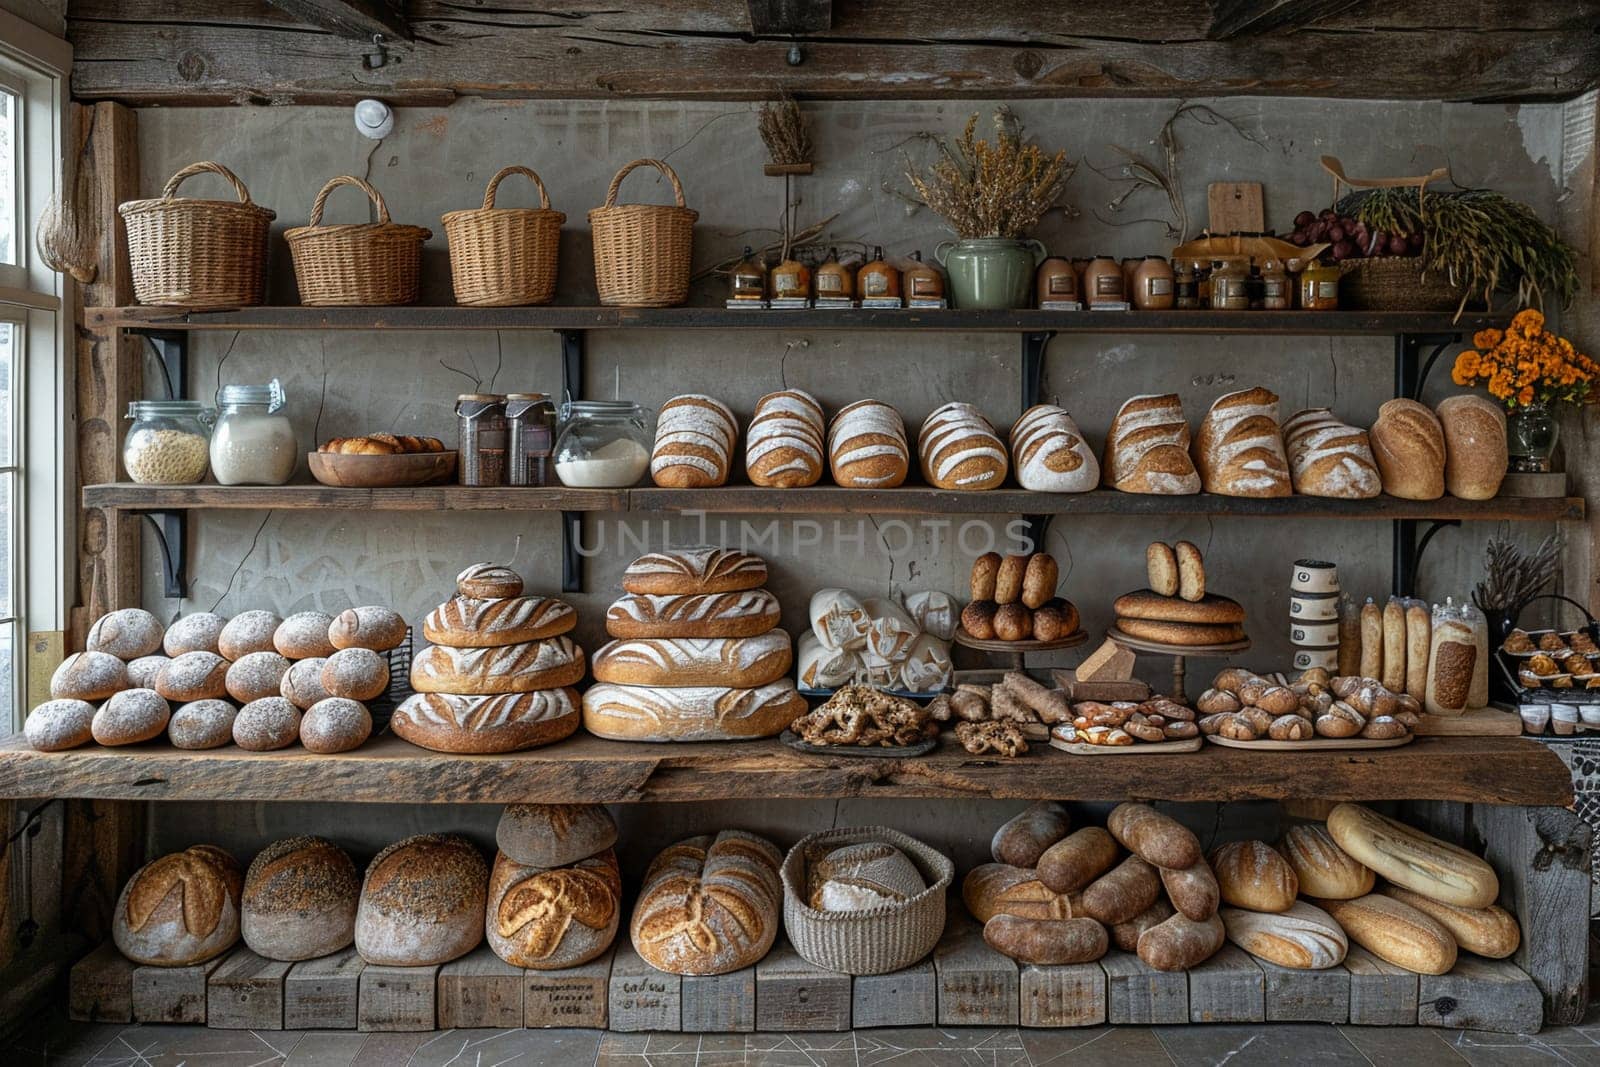 Rustic bread bakery with a wood-fired oven and artisan loaves by Benzoix